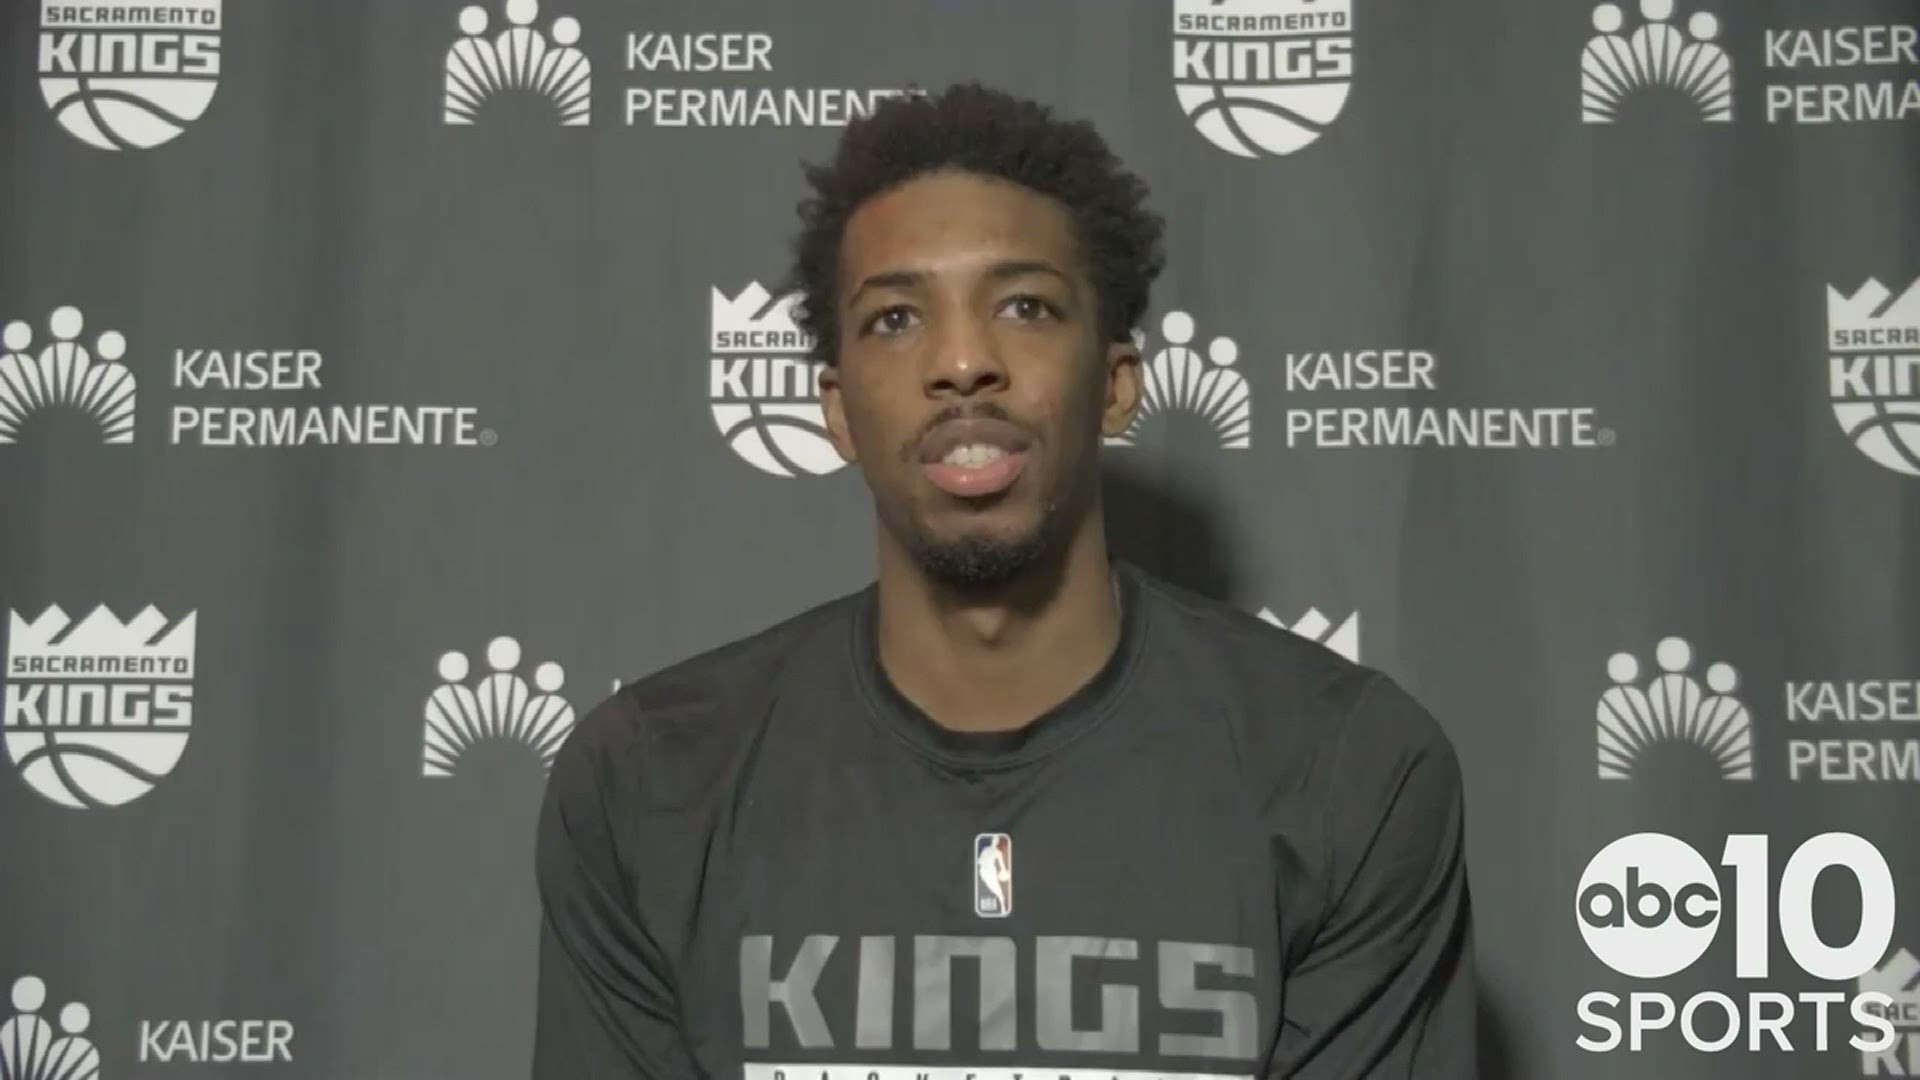 Delon Wright talks to the media for the first time about coming over in a trade from the Detroit Pistons & making his Kings debut in a thrilling win over the Cavs.